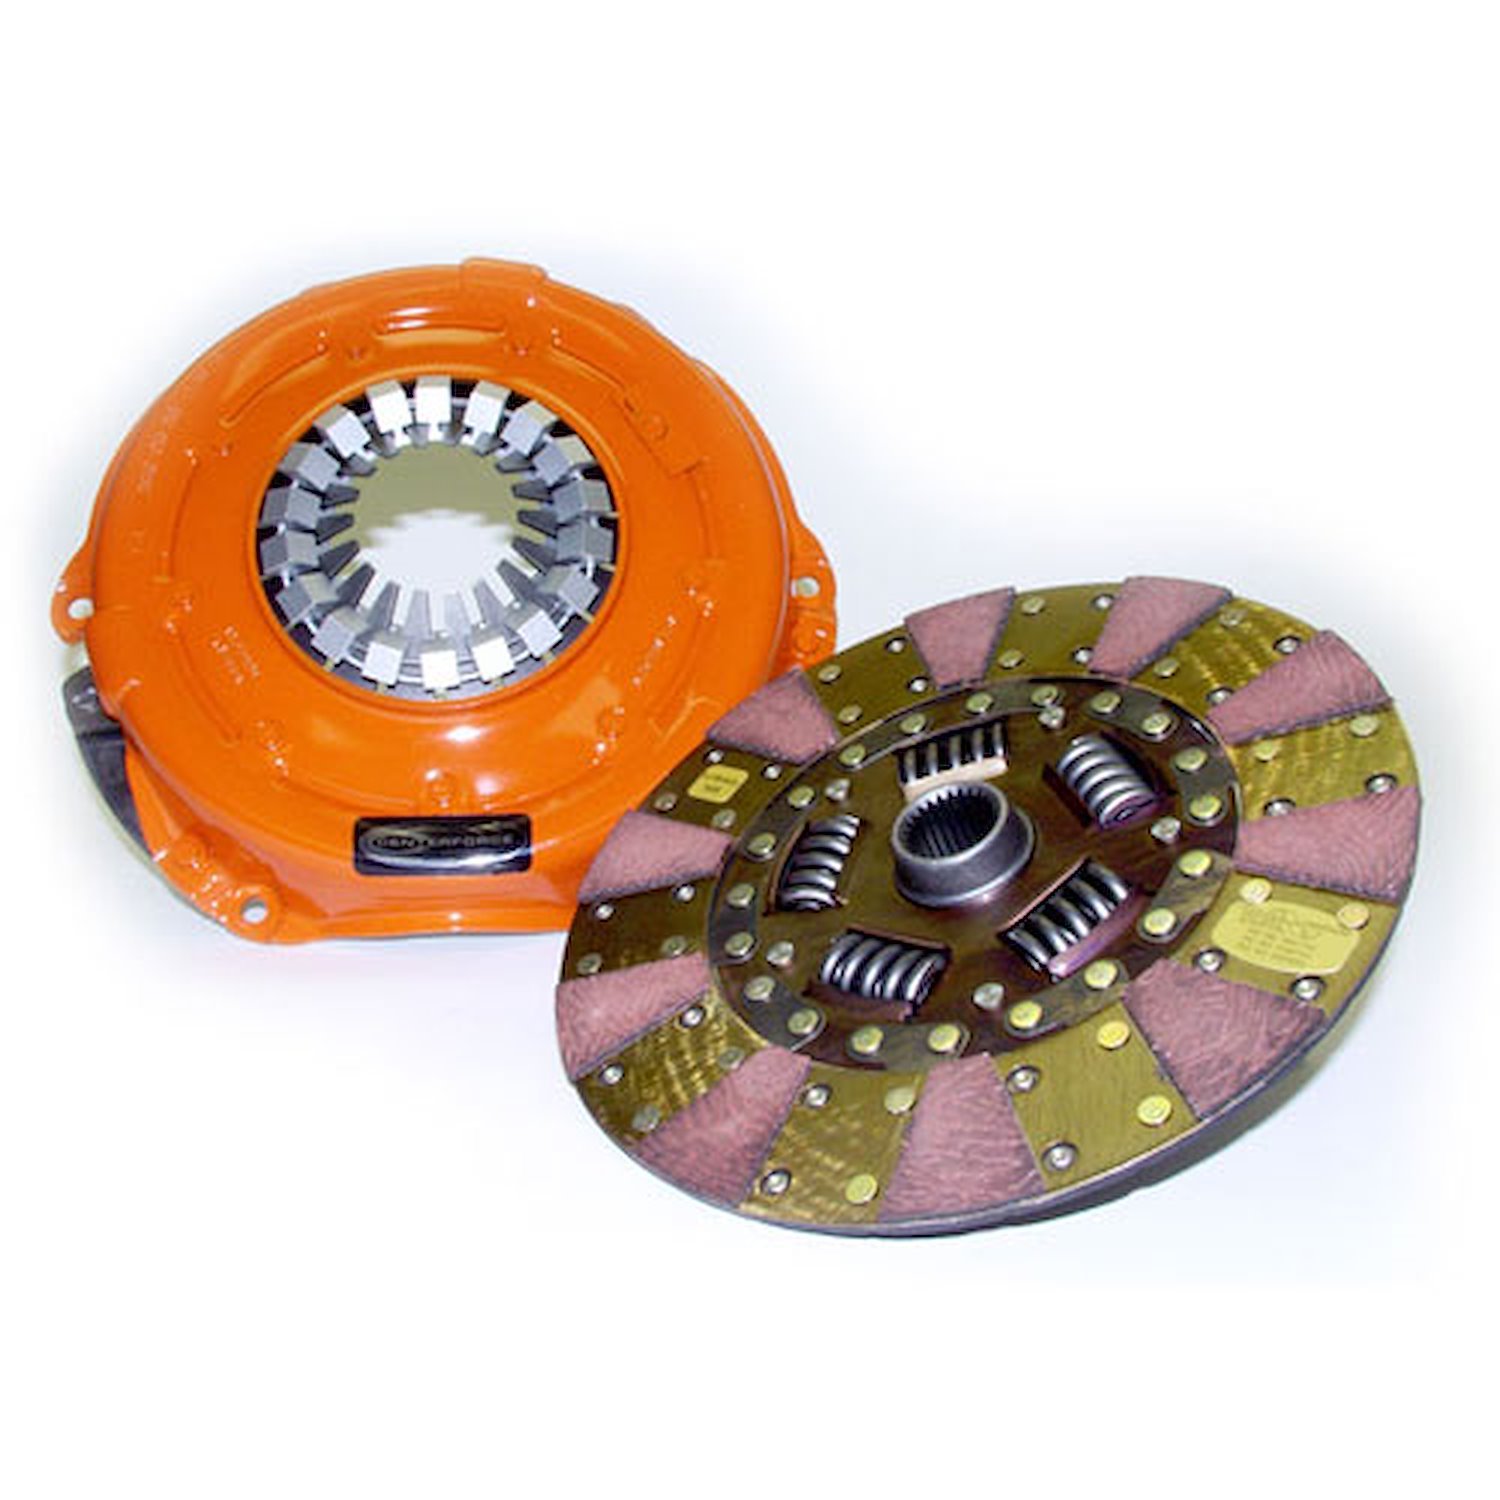 Dual Friction Clutch Includes Pressure Plate, Disc, & Bolts